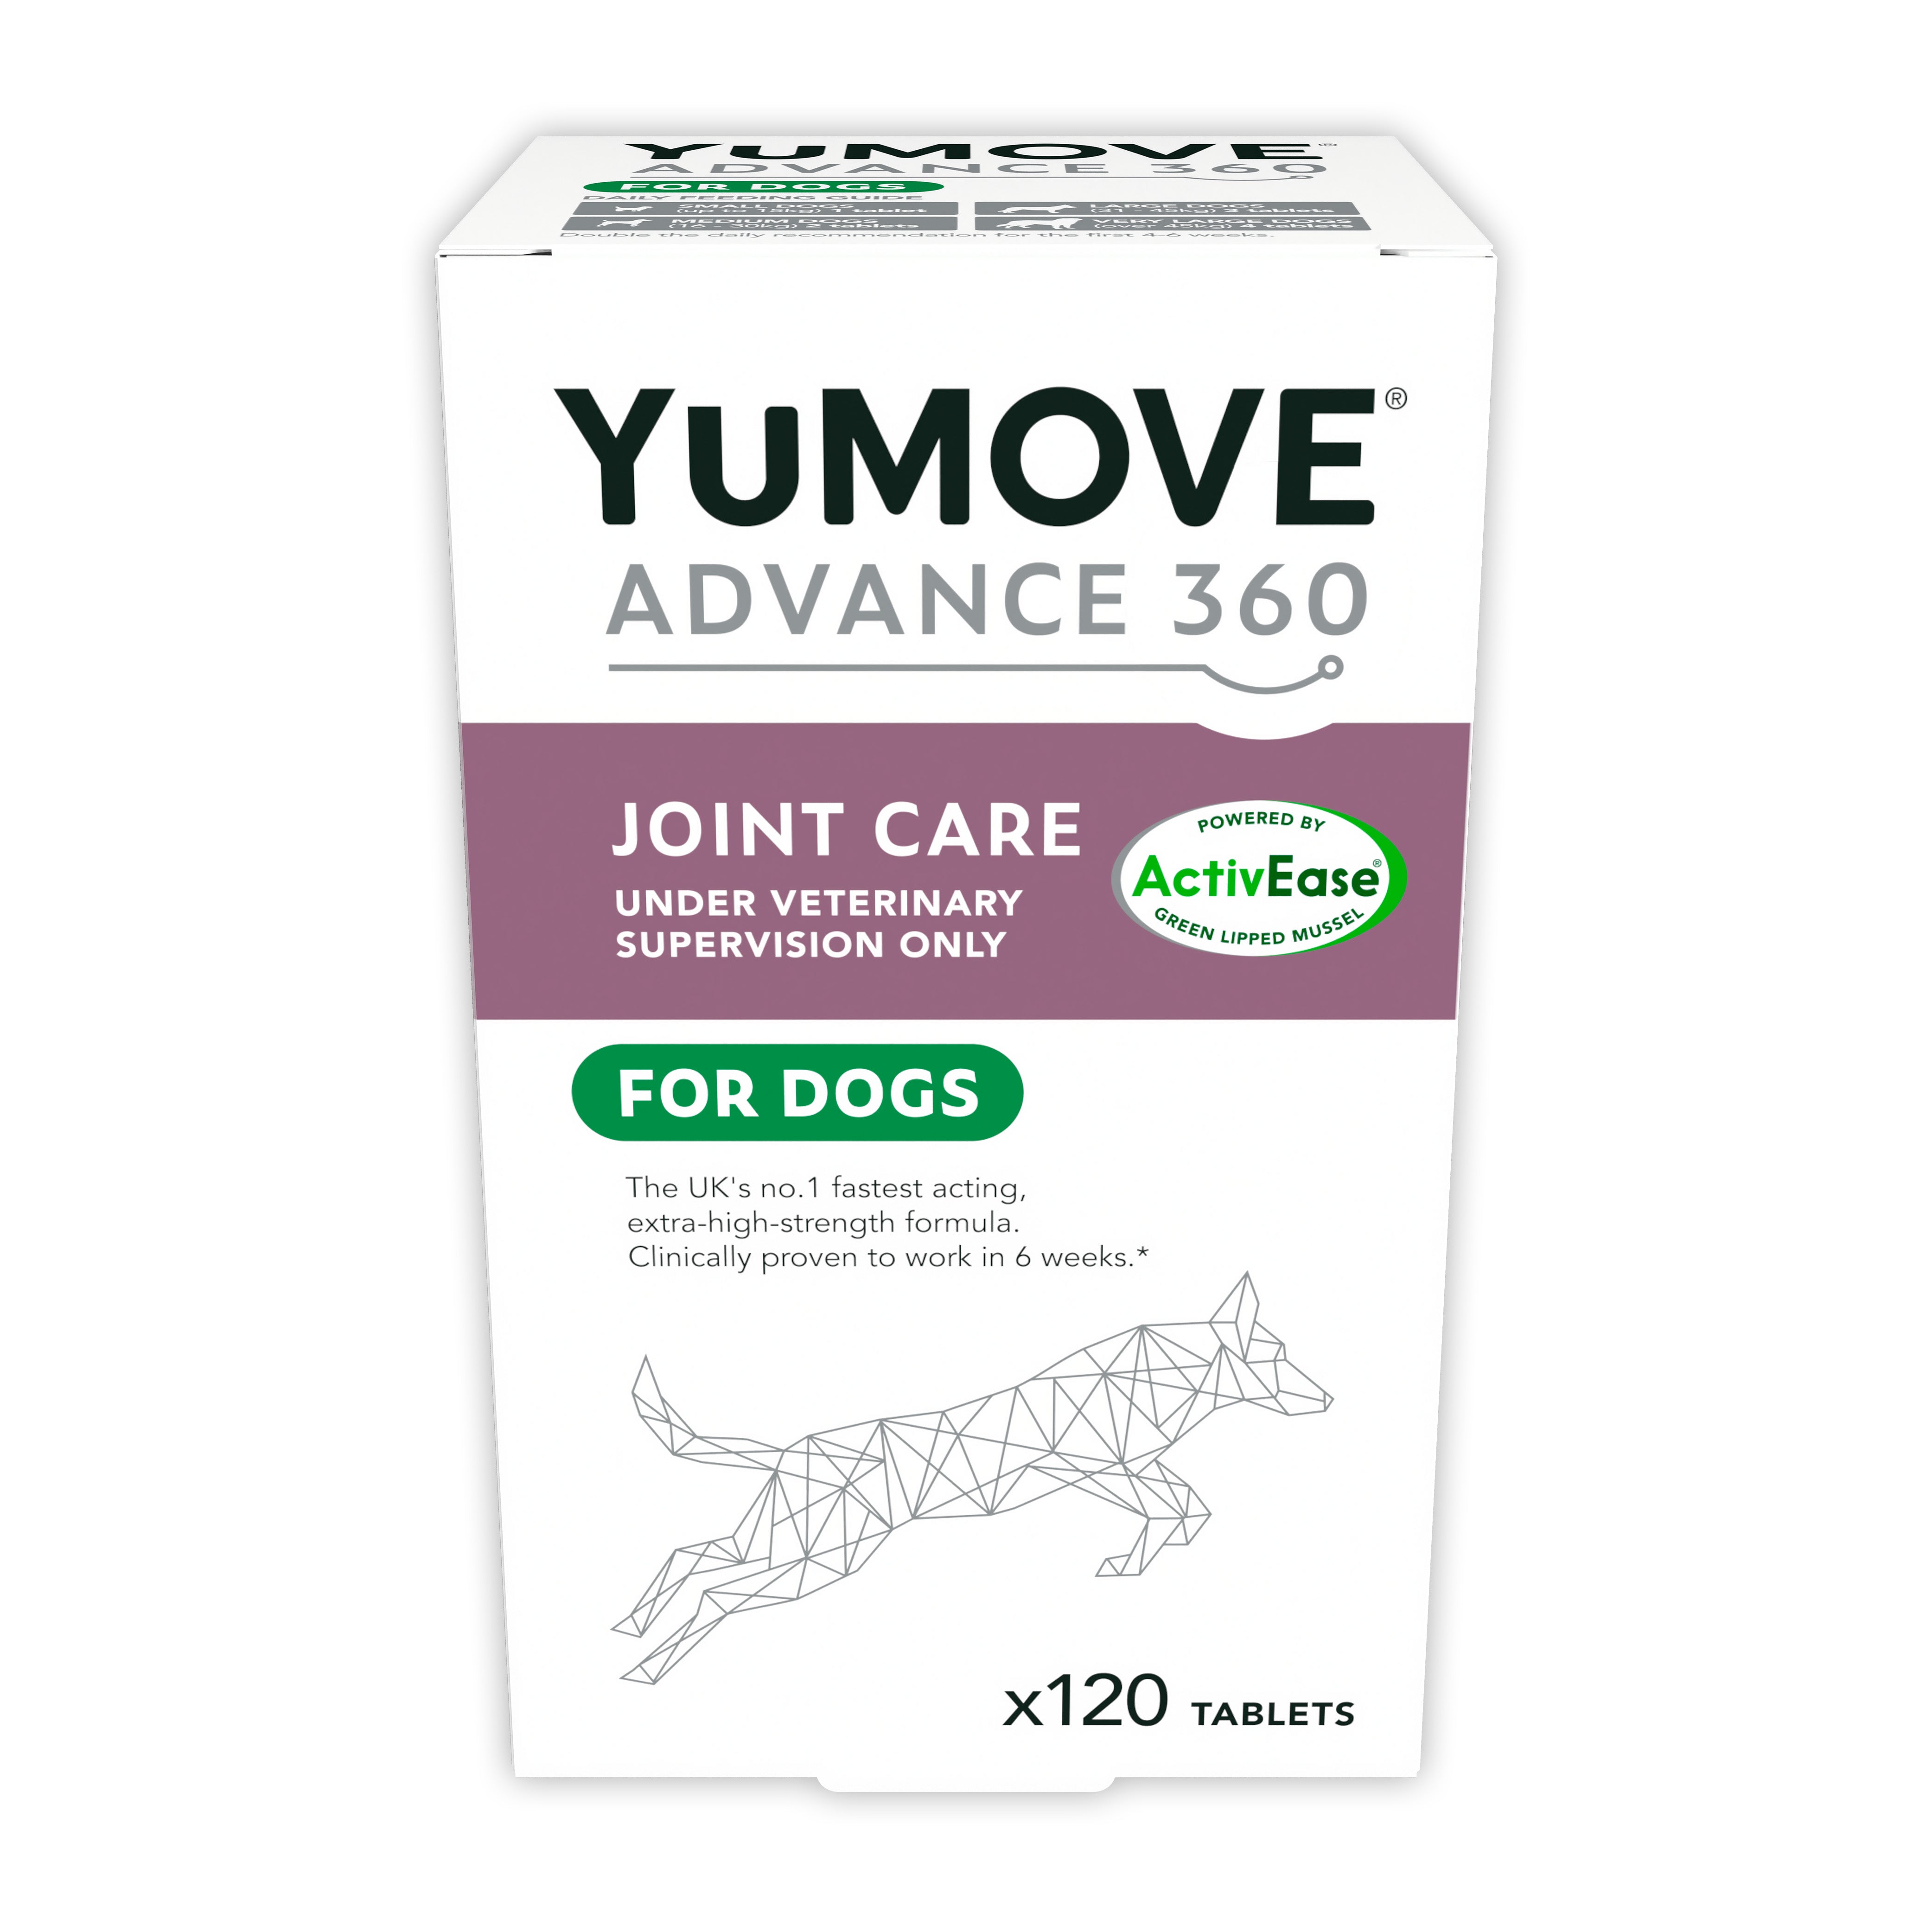 YuMOVE ADVANCE 360 Joint Care for Dogs